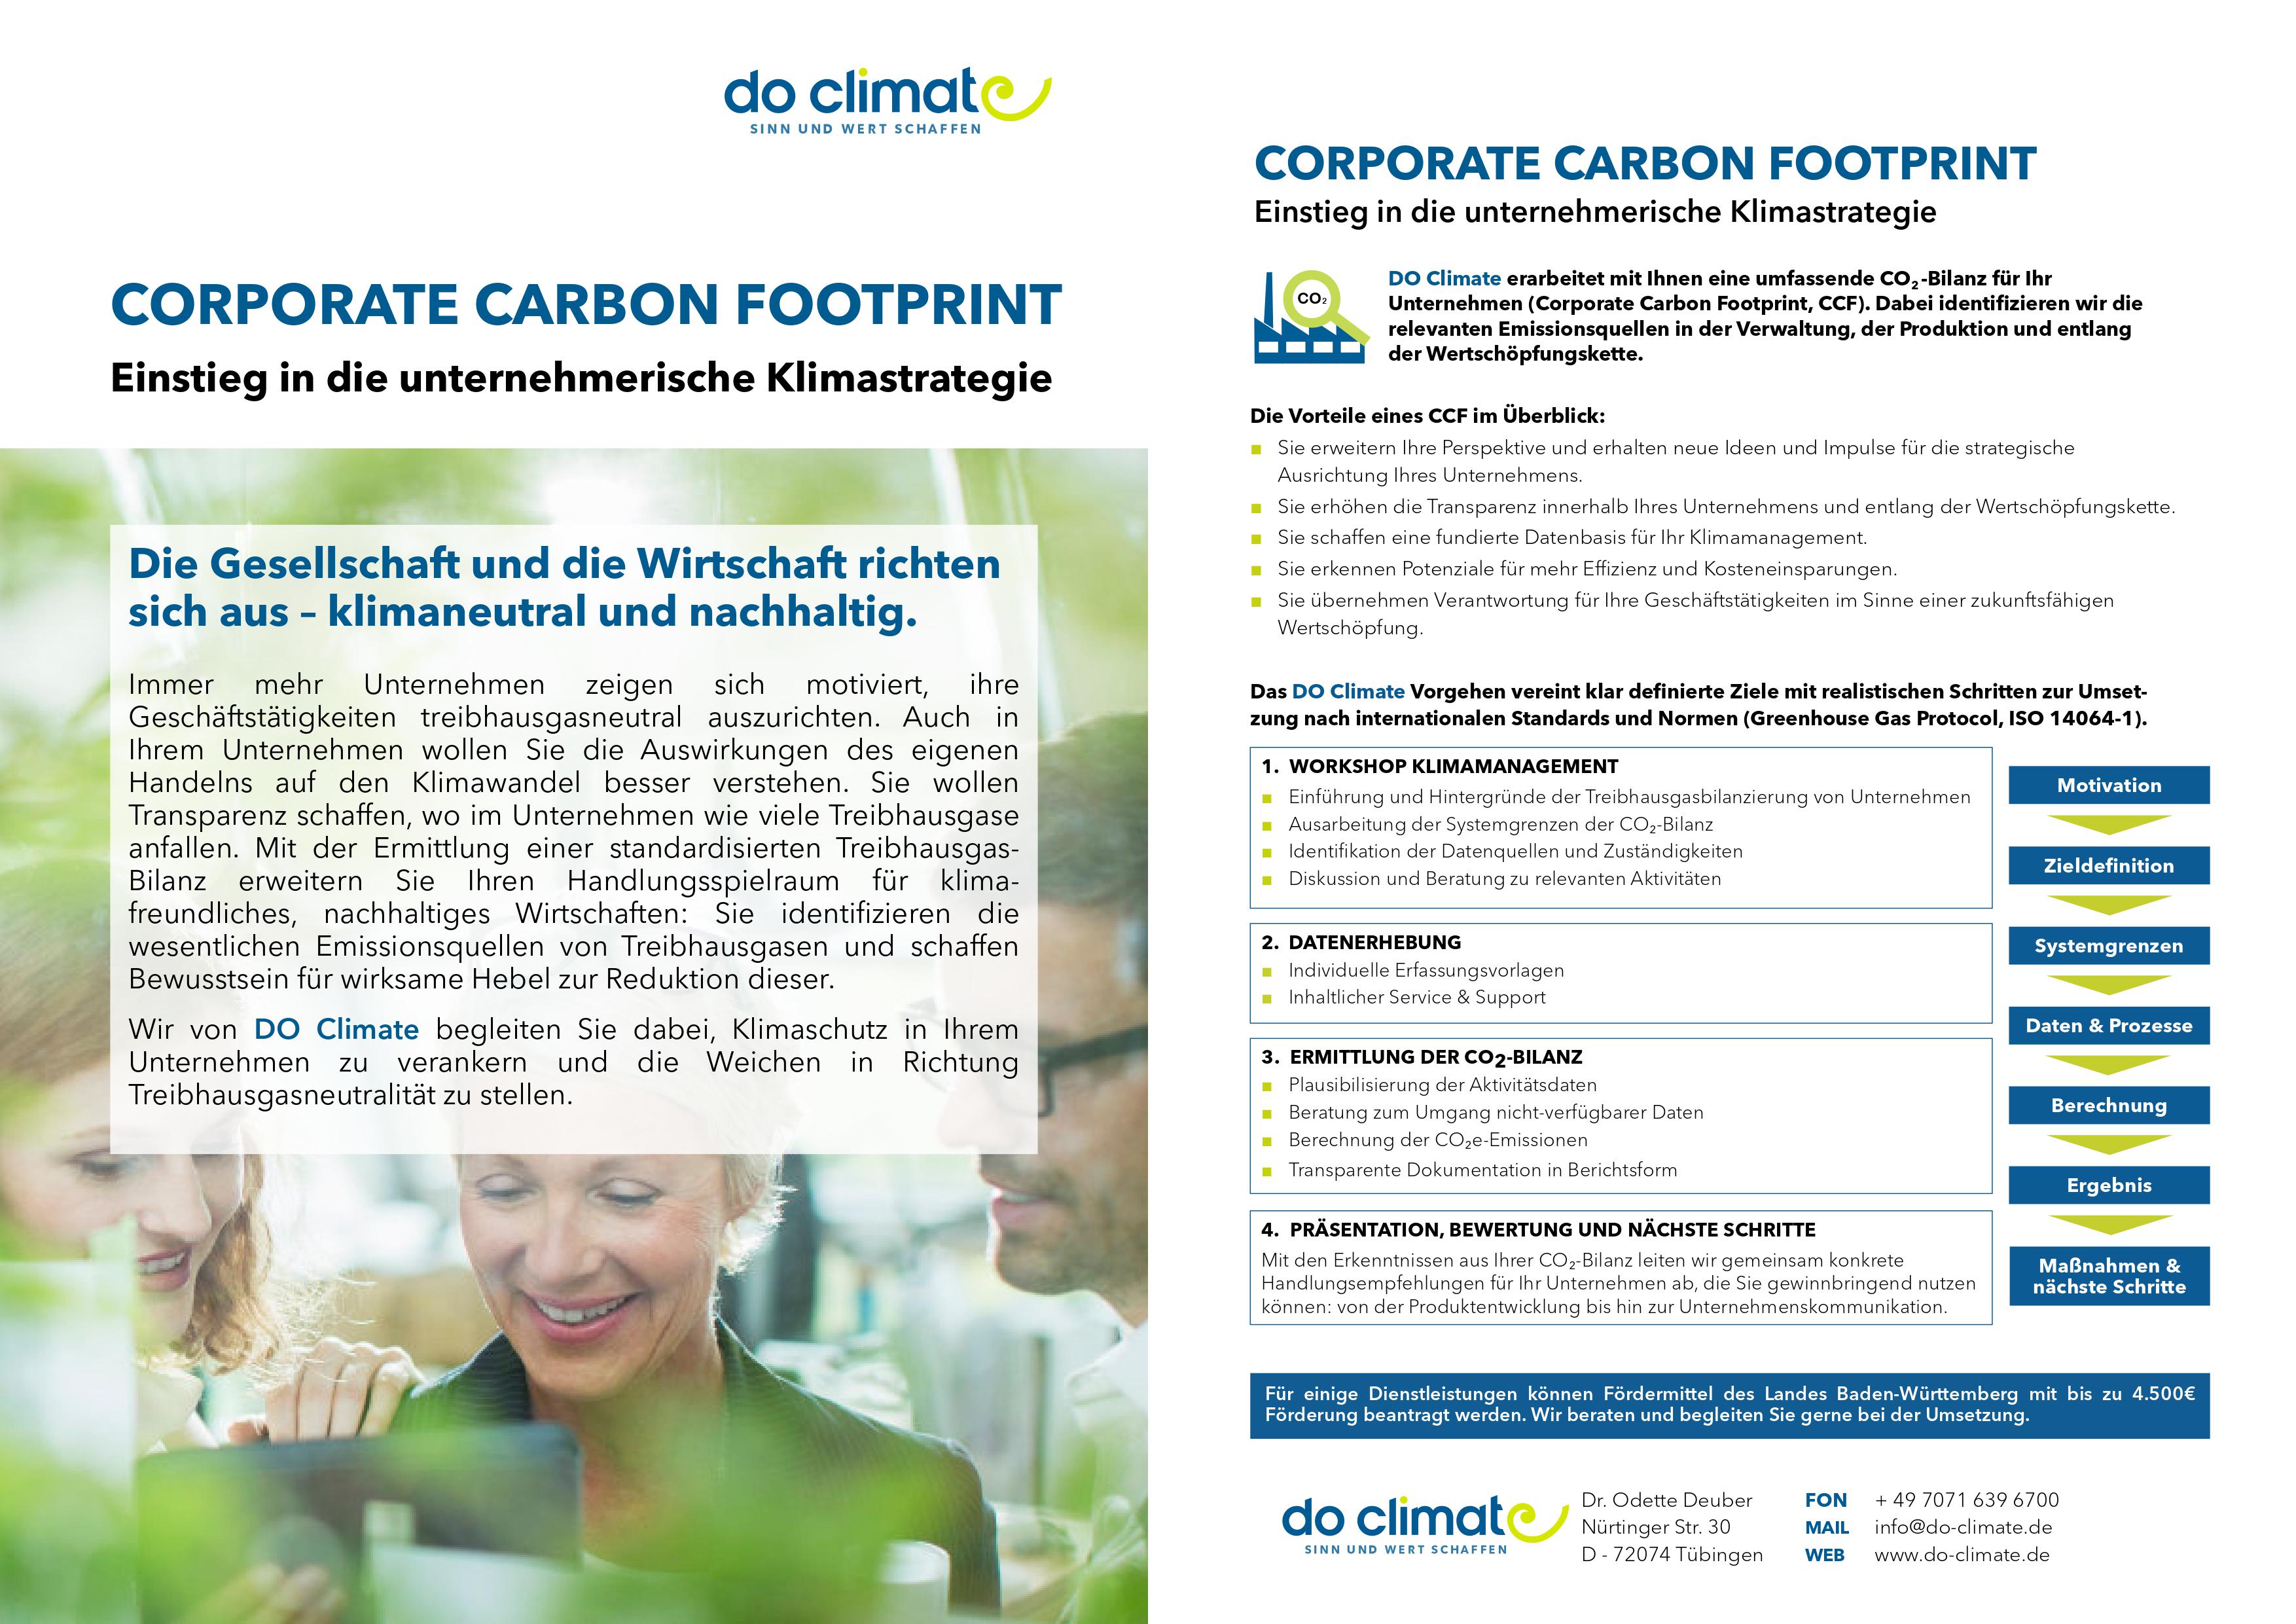 Product sheet on the Corporate Carbon Footprint